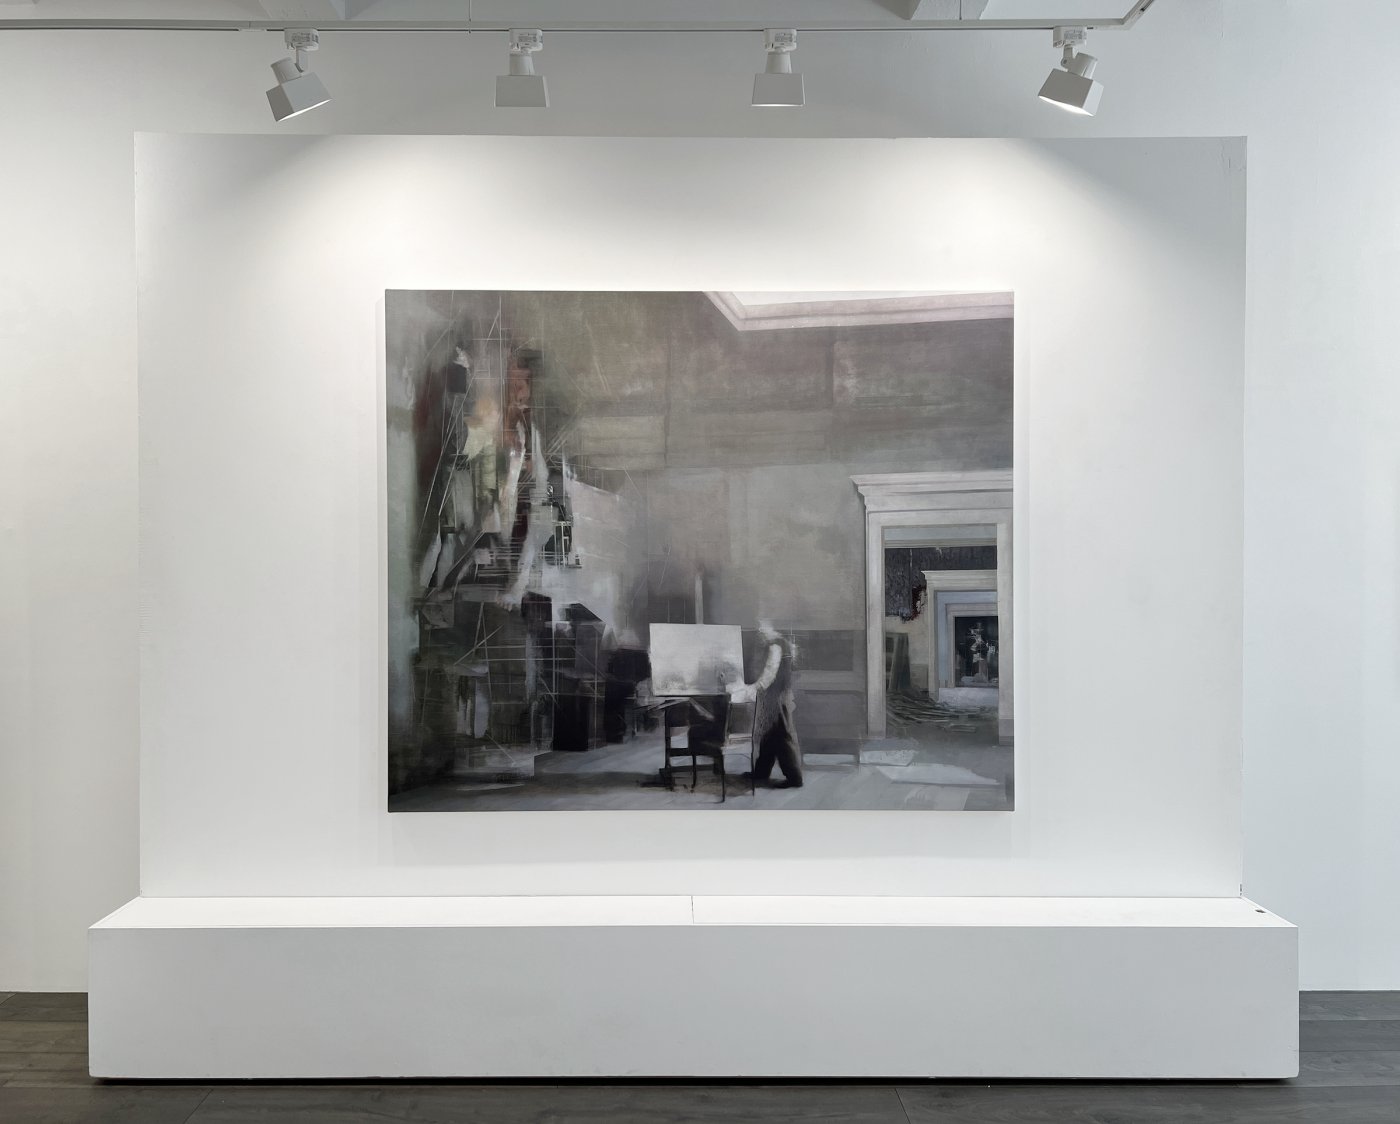 Installation image for Tim Kent: Between the Lines, at Hollis Taggart